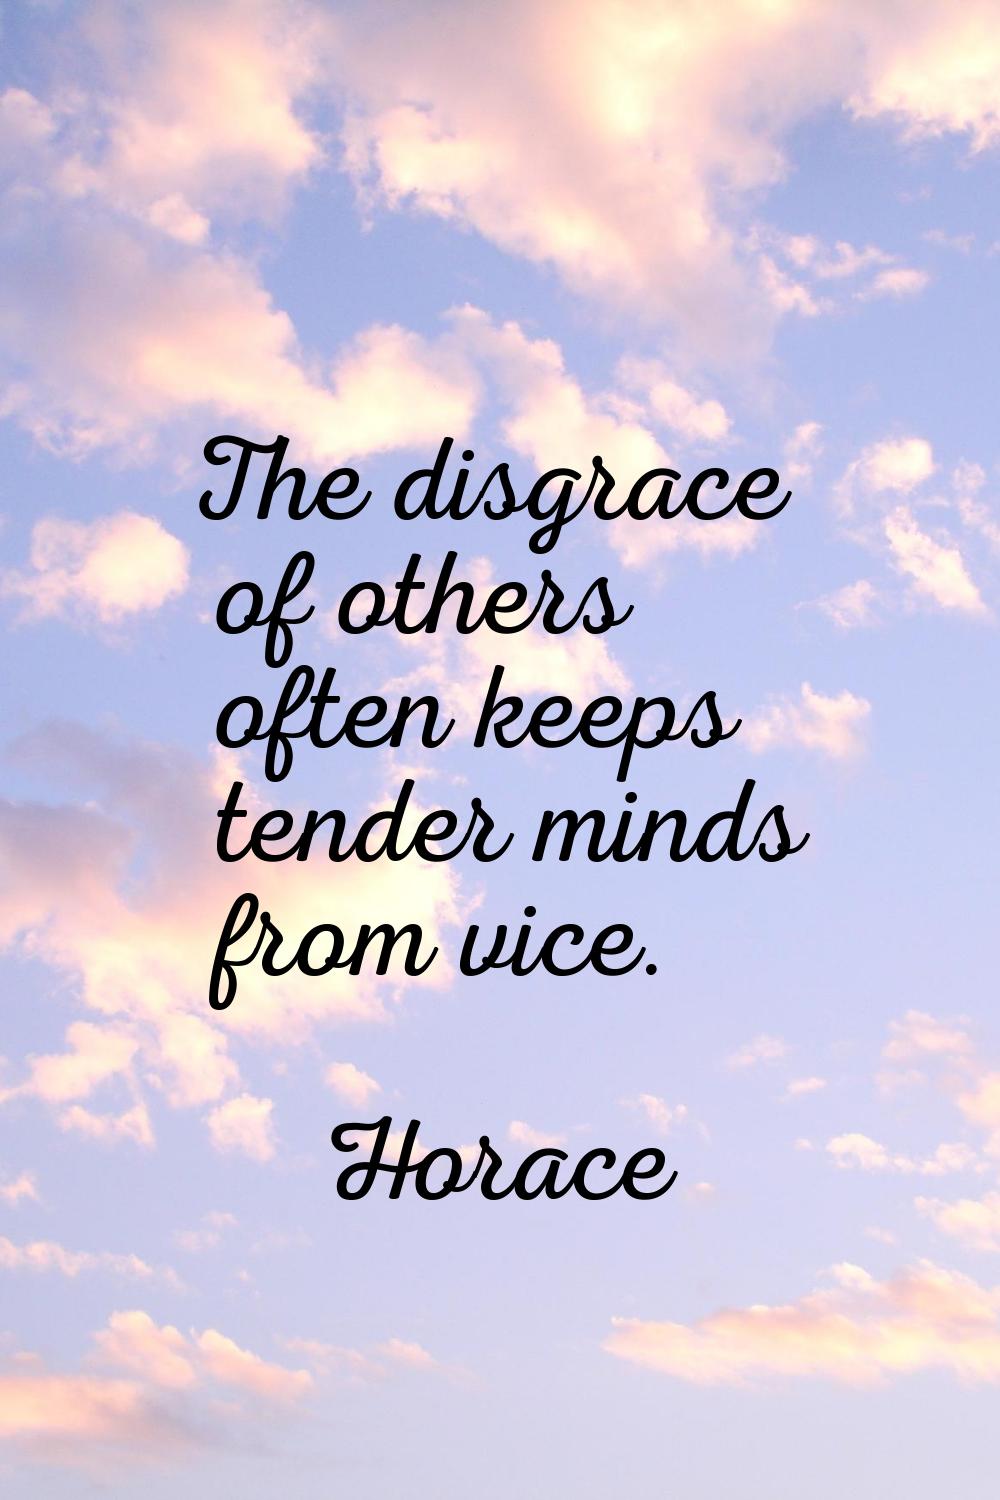 The disgrace of others often keeps tender minds from vice.